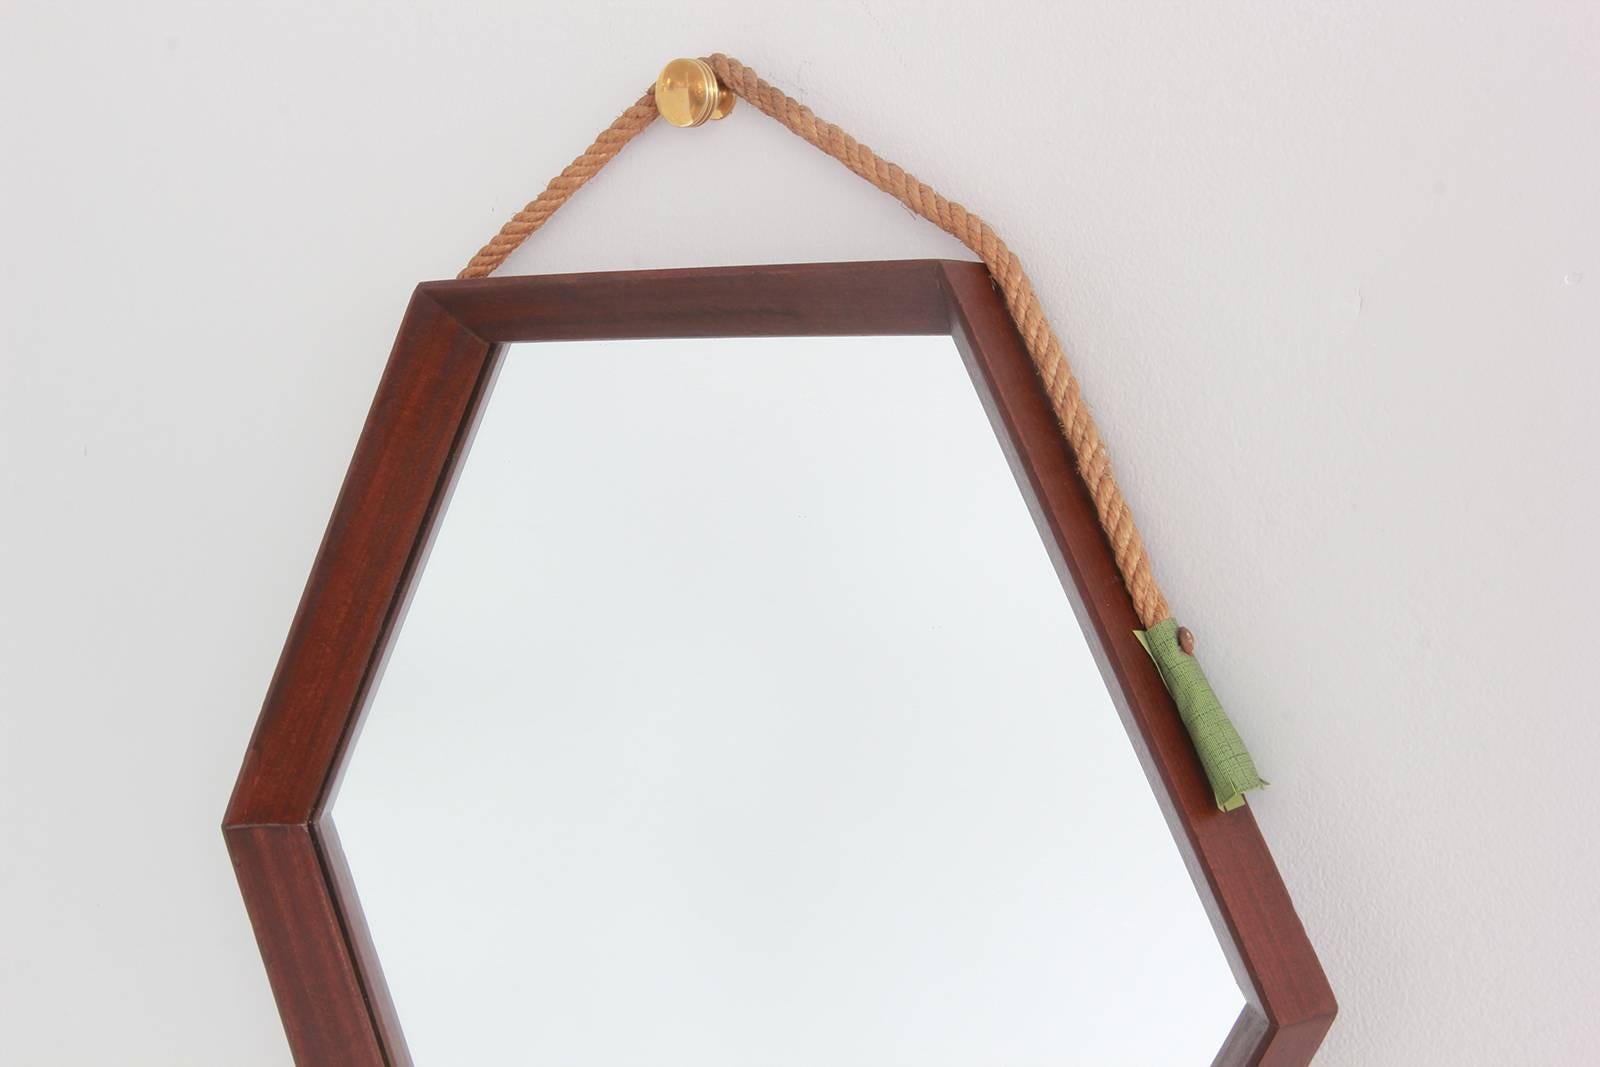 Vintage hexagonal mirror with rope strap and green leather tassle attachment

Bottom of mirror to top of knob measures 20